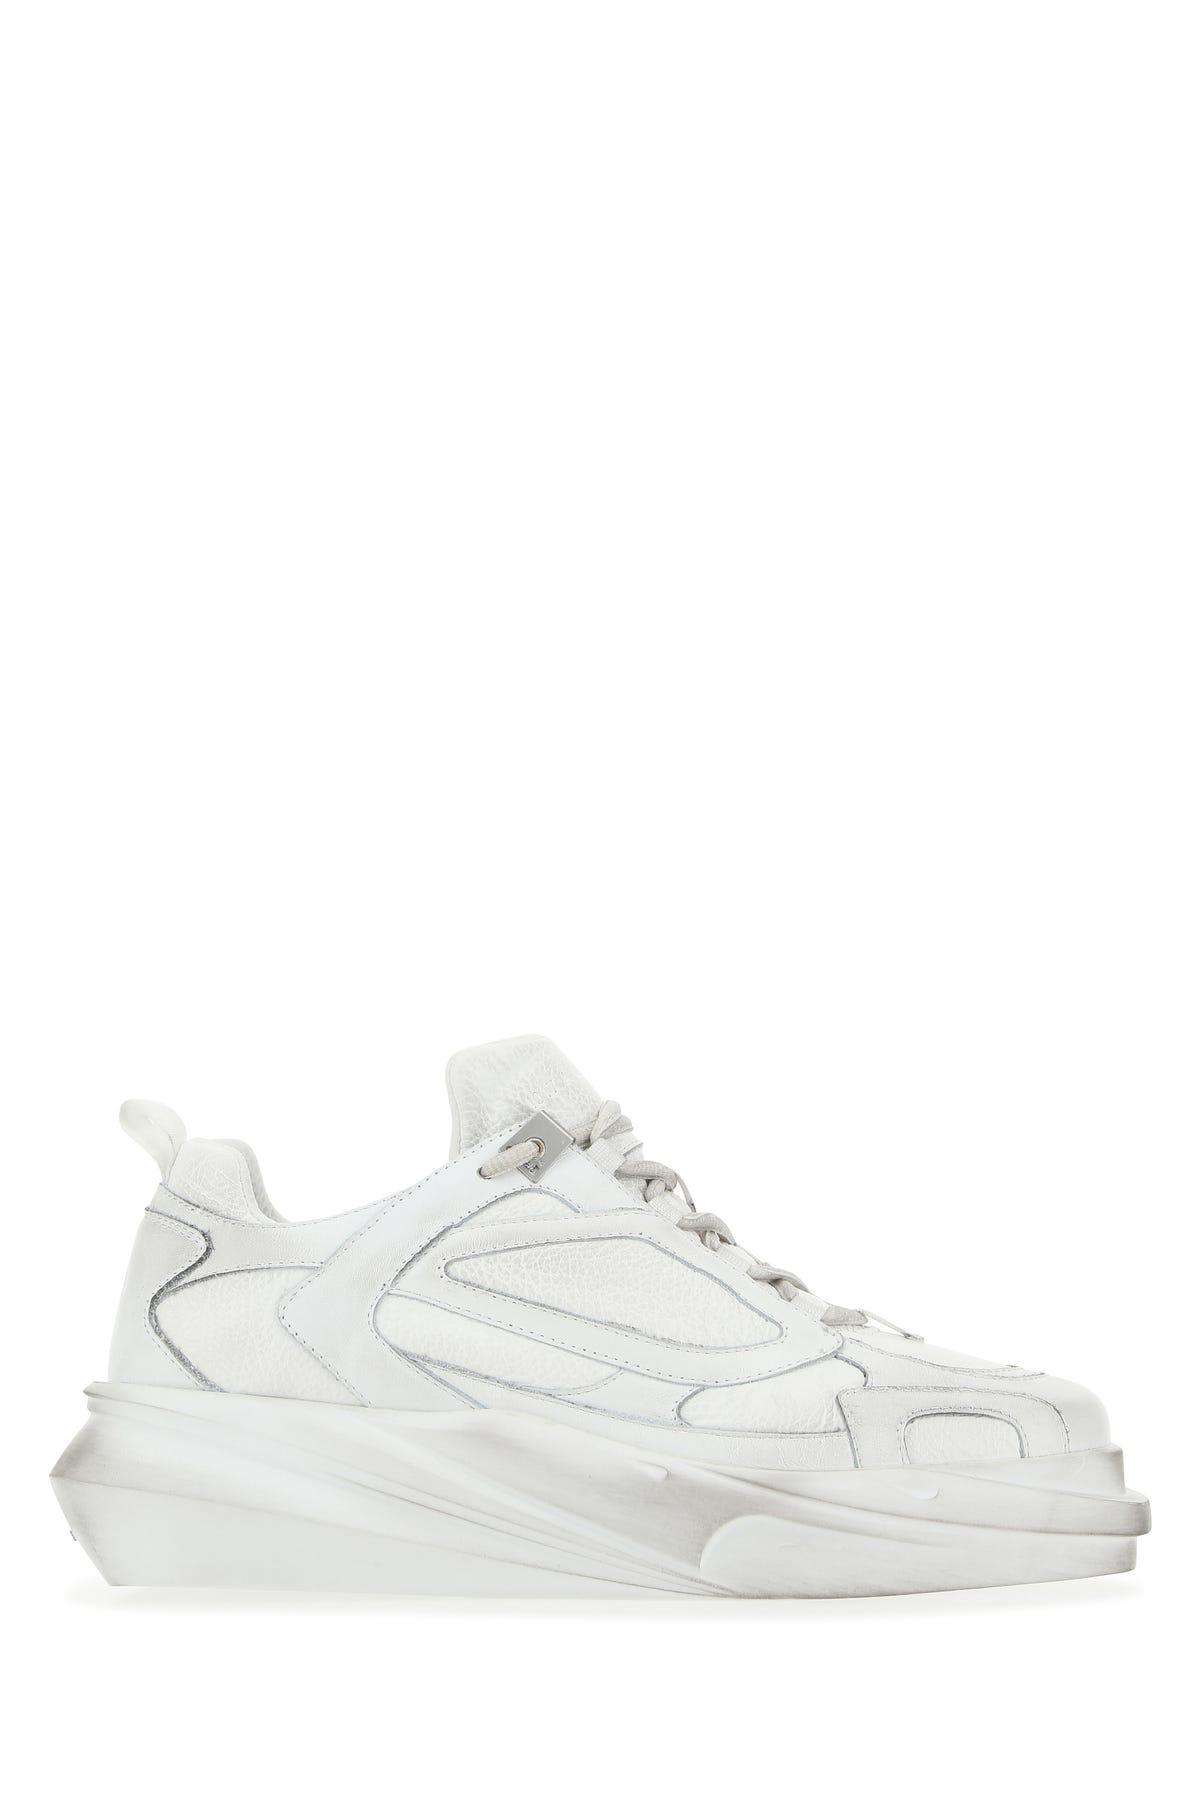 1017 ALYX 9SM Leather Sneakers in White | Lyst